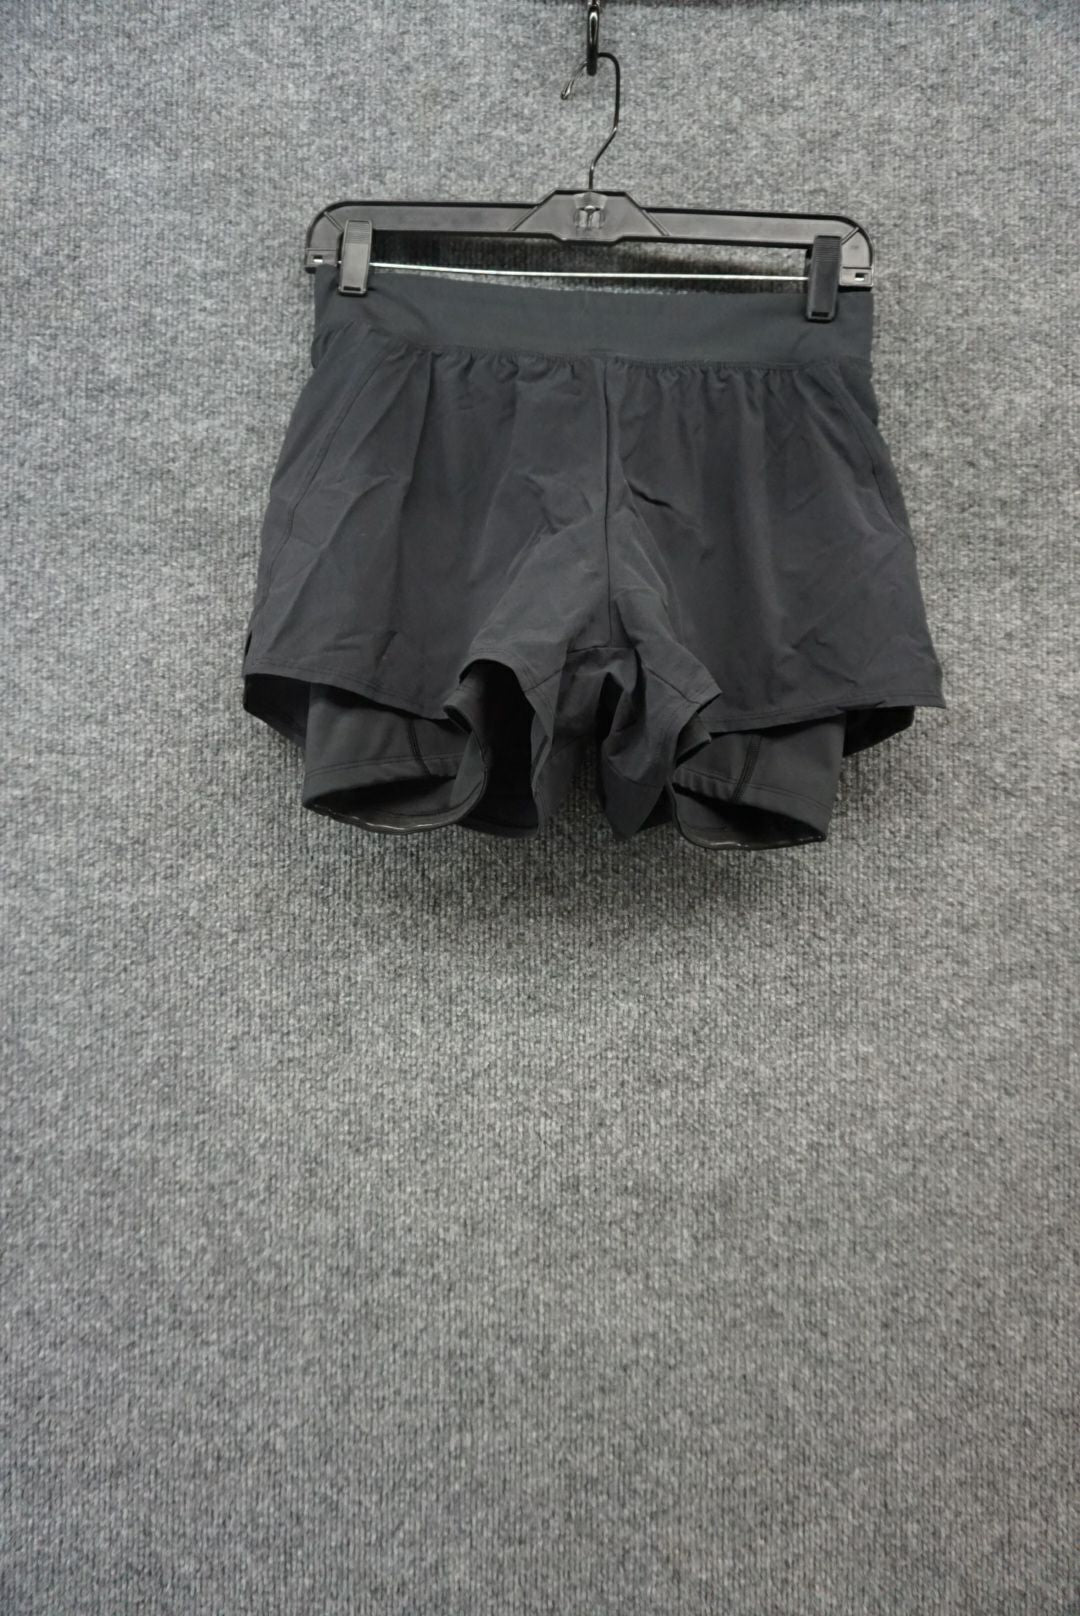 REI Size W Small Women's Active Shorts